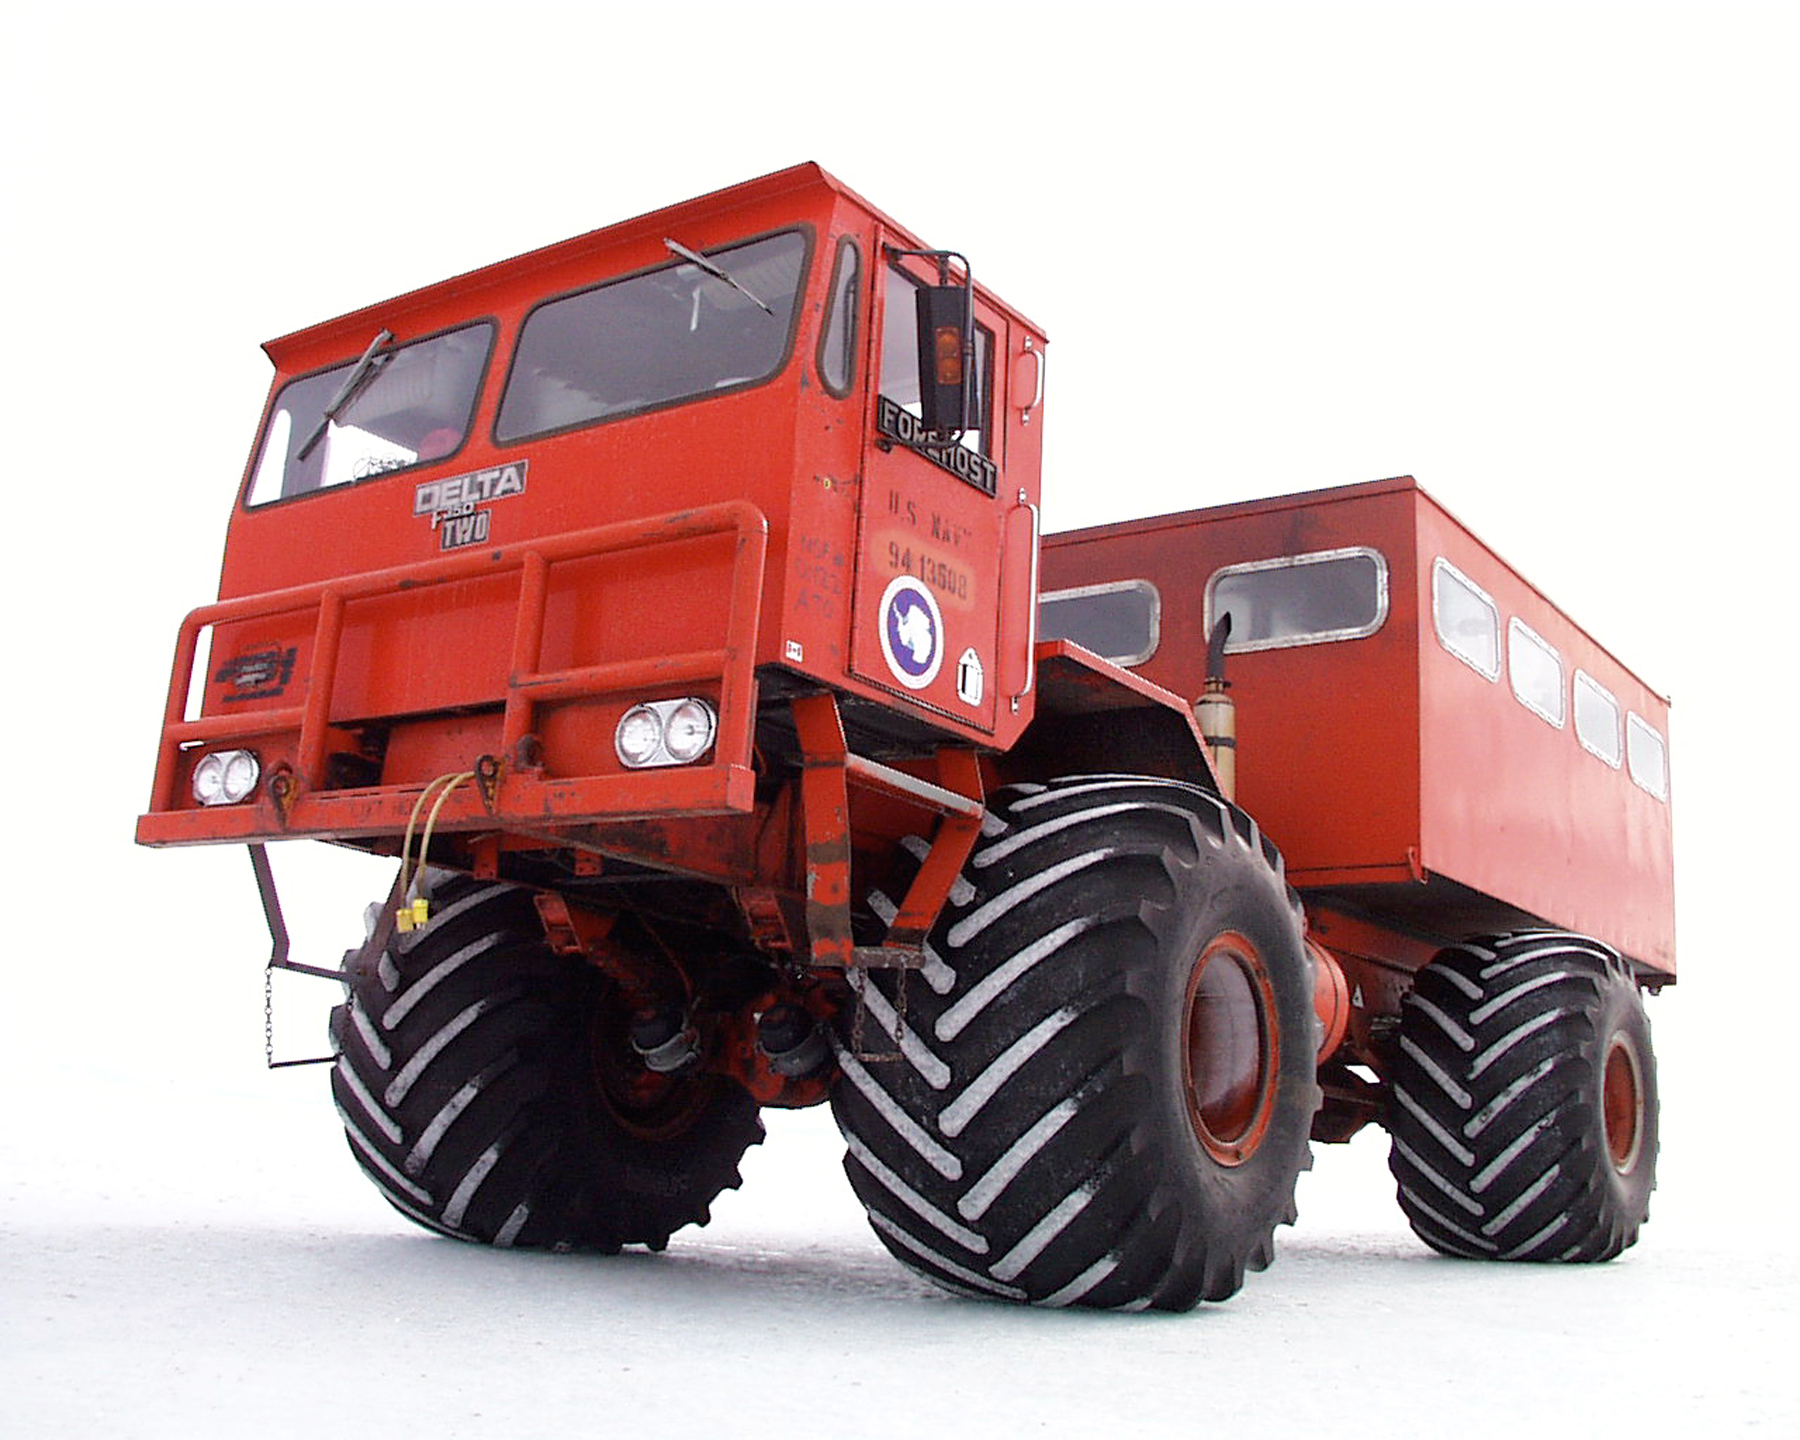 An enormous red truck with tires nearly six foot tall.